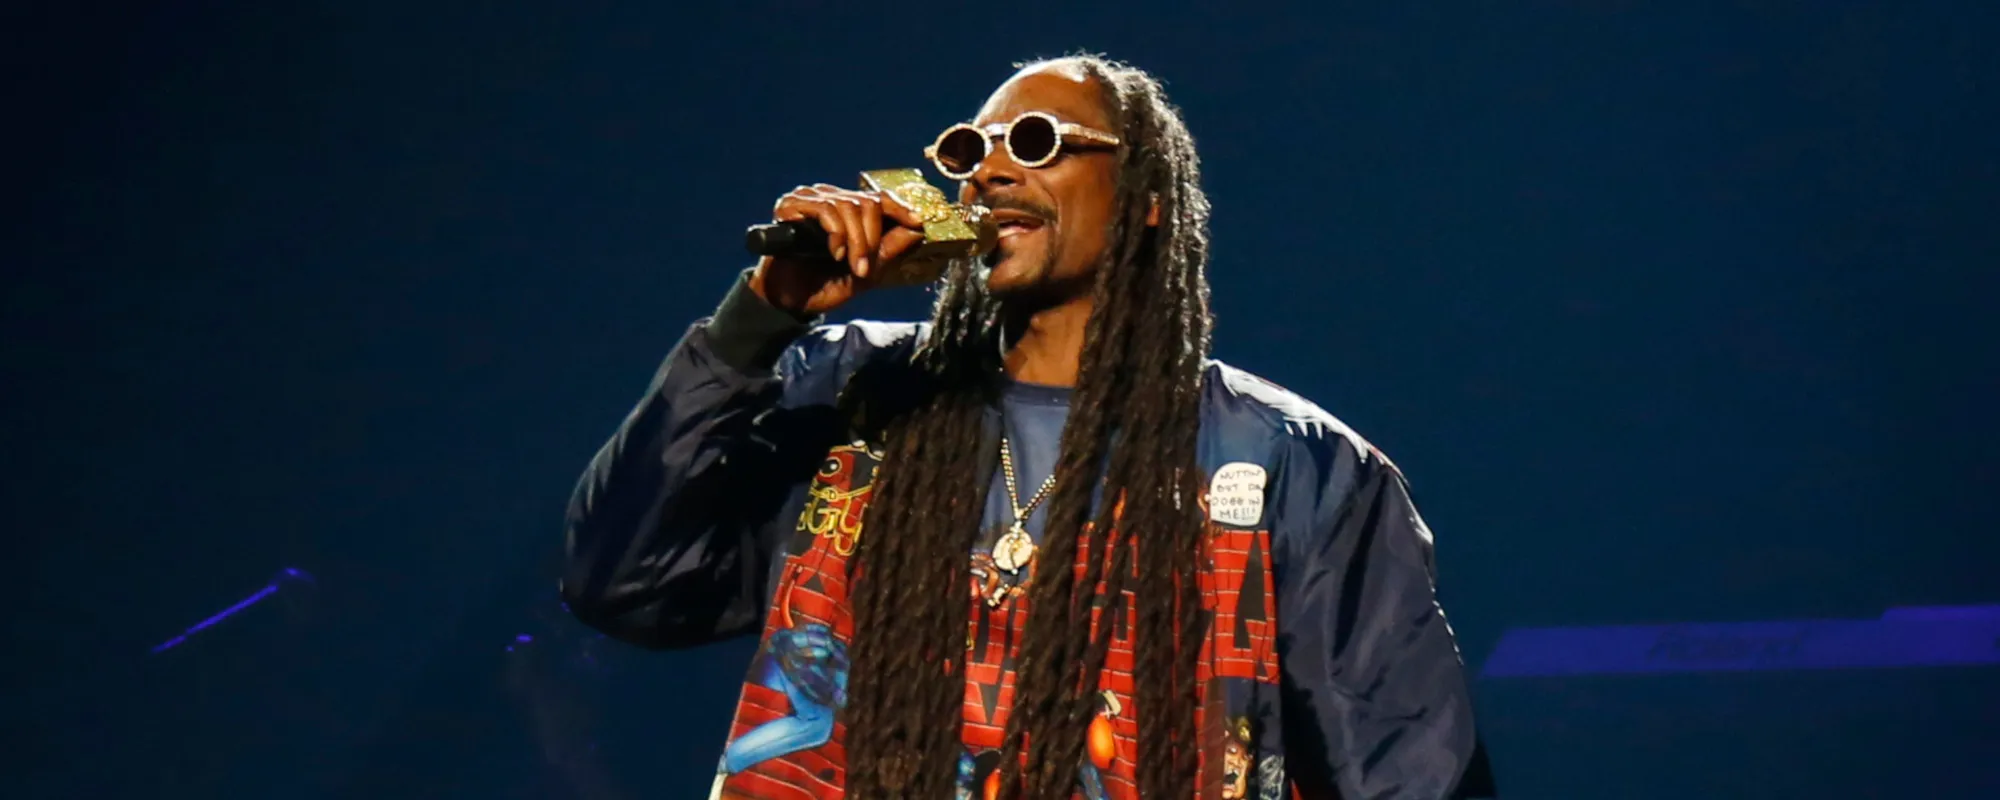 Snoop Dogg Pulls Music from Spotify, Plans New Death Row Records App